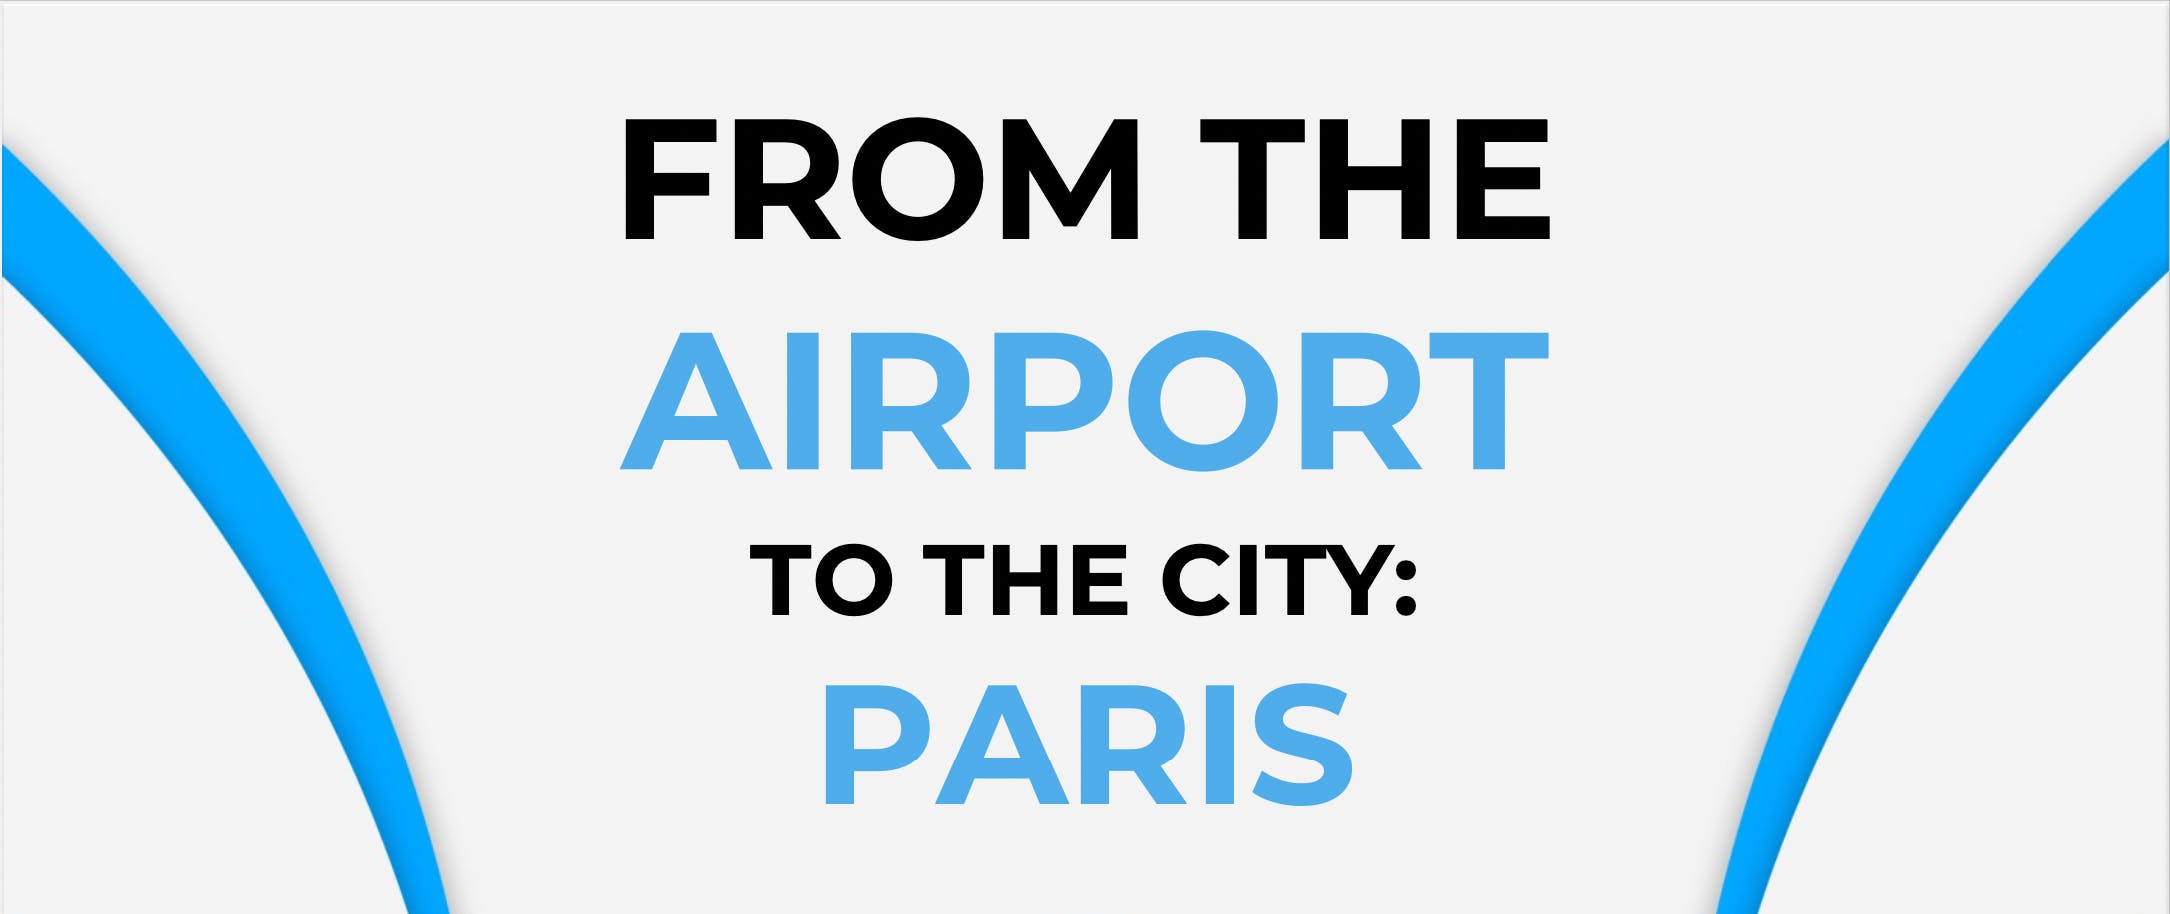 12 From The Airport To The City Guides Just for you